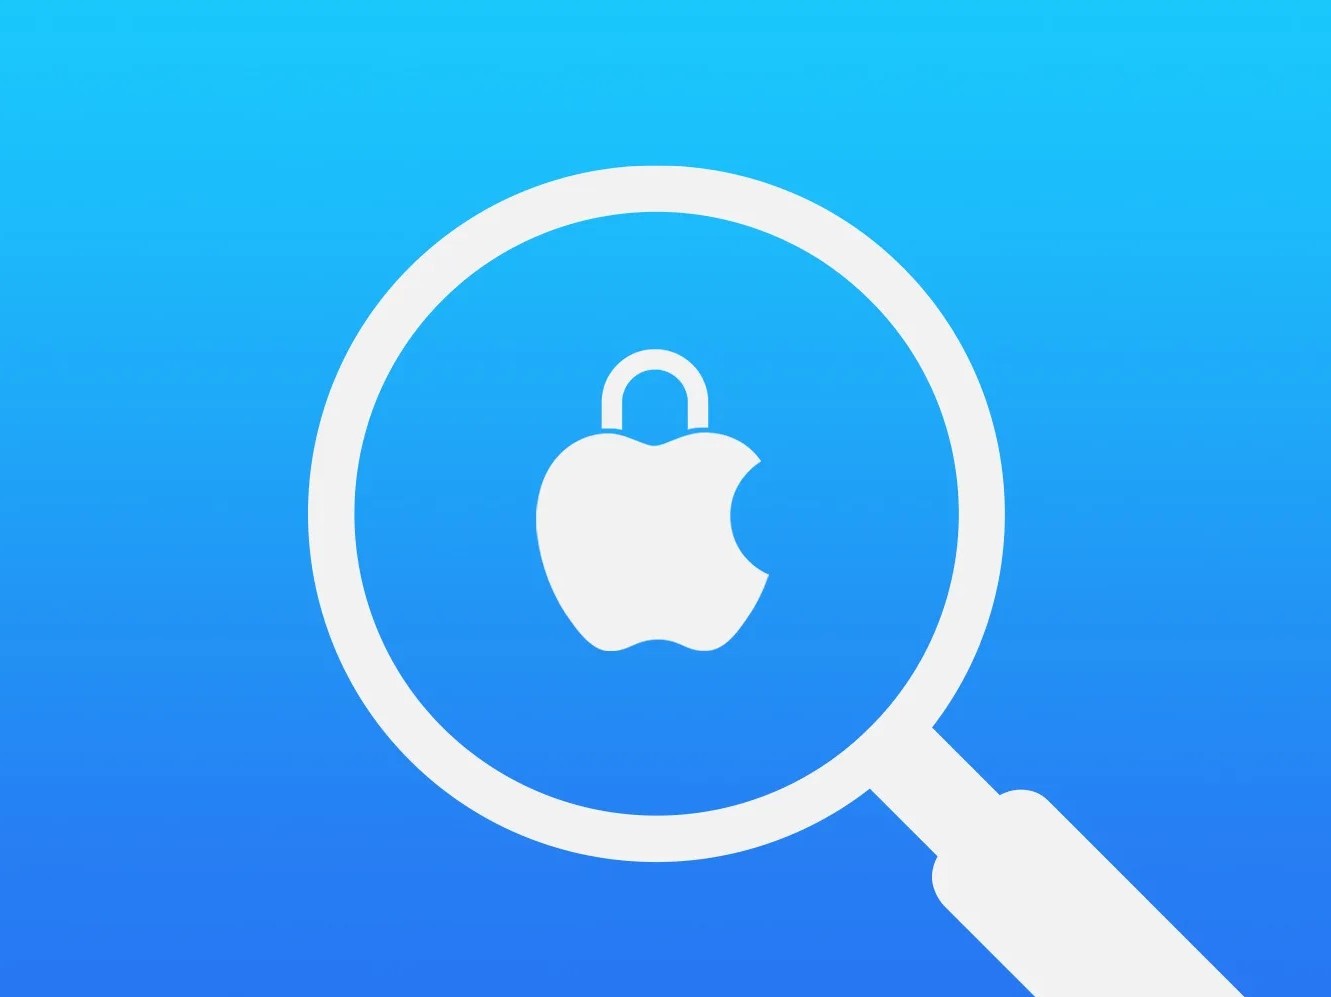 Apple's New "Lockdown Mode" Protects iPhone, iPad, and Mac Against Spyware